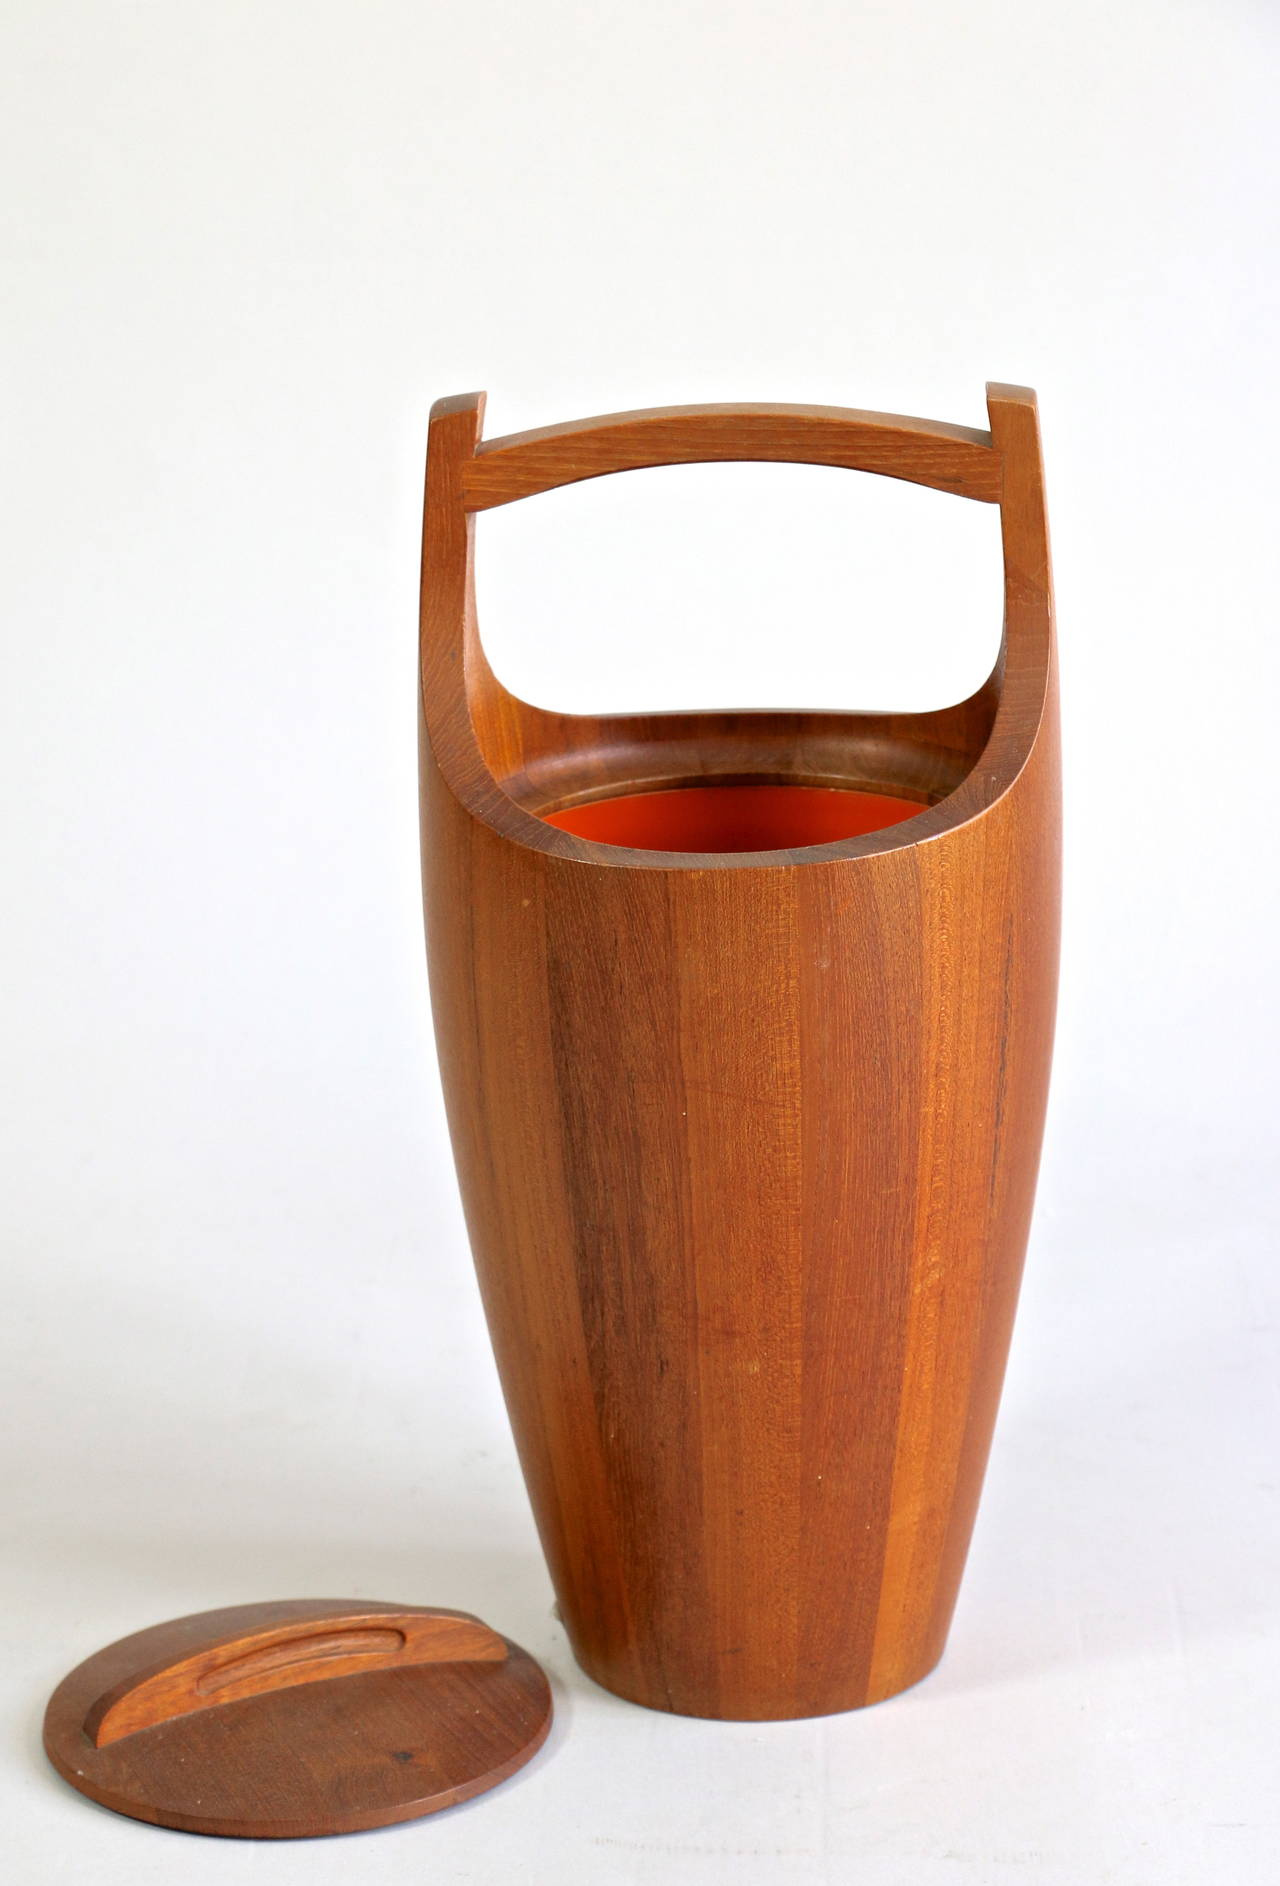 Teak ice bucket inspired by the shape of viking ships. Bridge-shaped cove reminiscent of ancient Japanese ceramics.
One of Jens Quistgaard's most famous creations. Made for the renowned Dansk Designs Denmark.